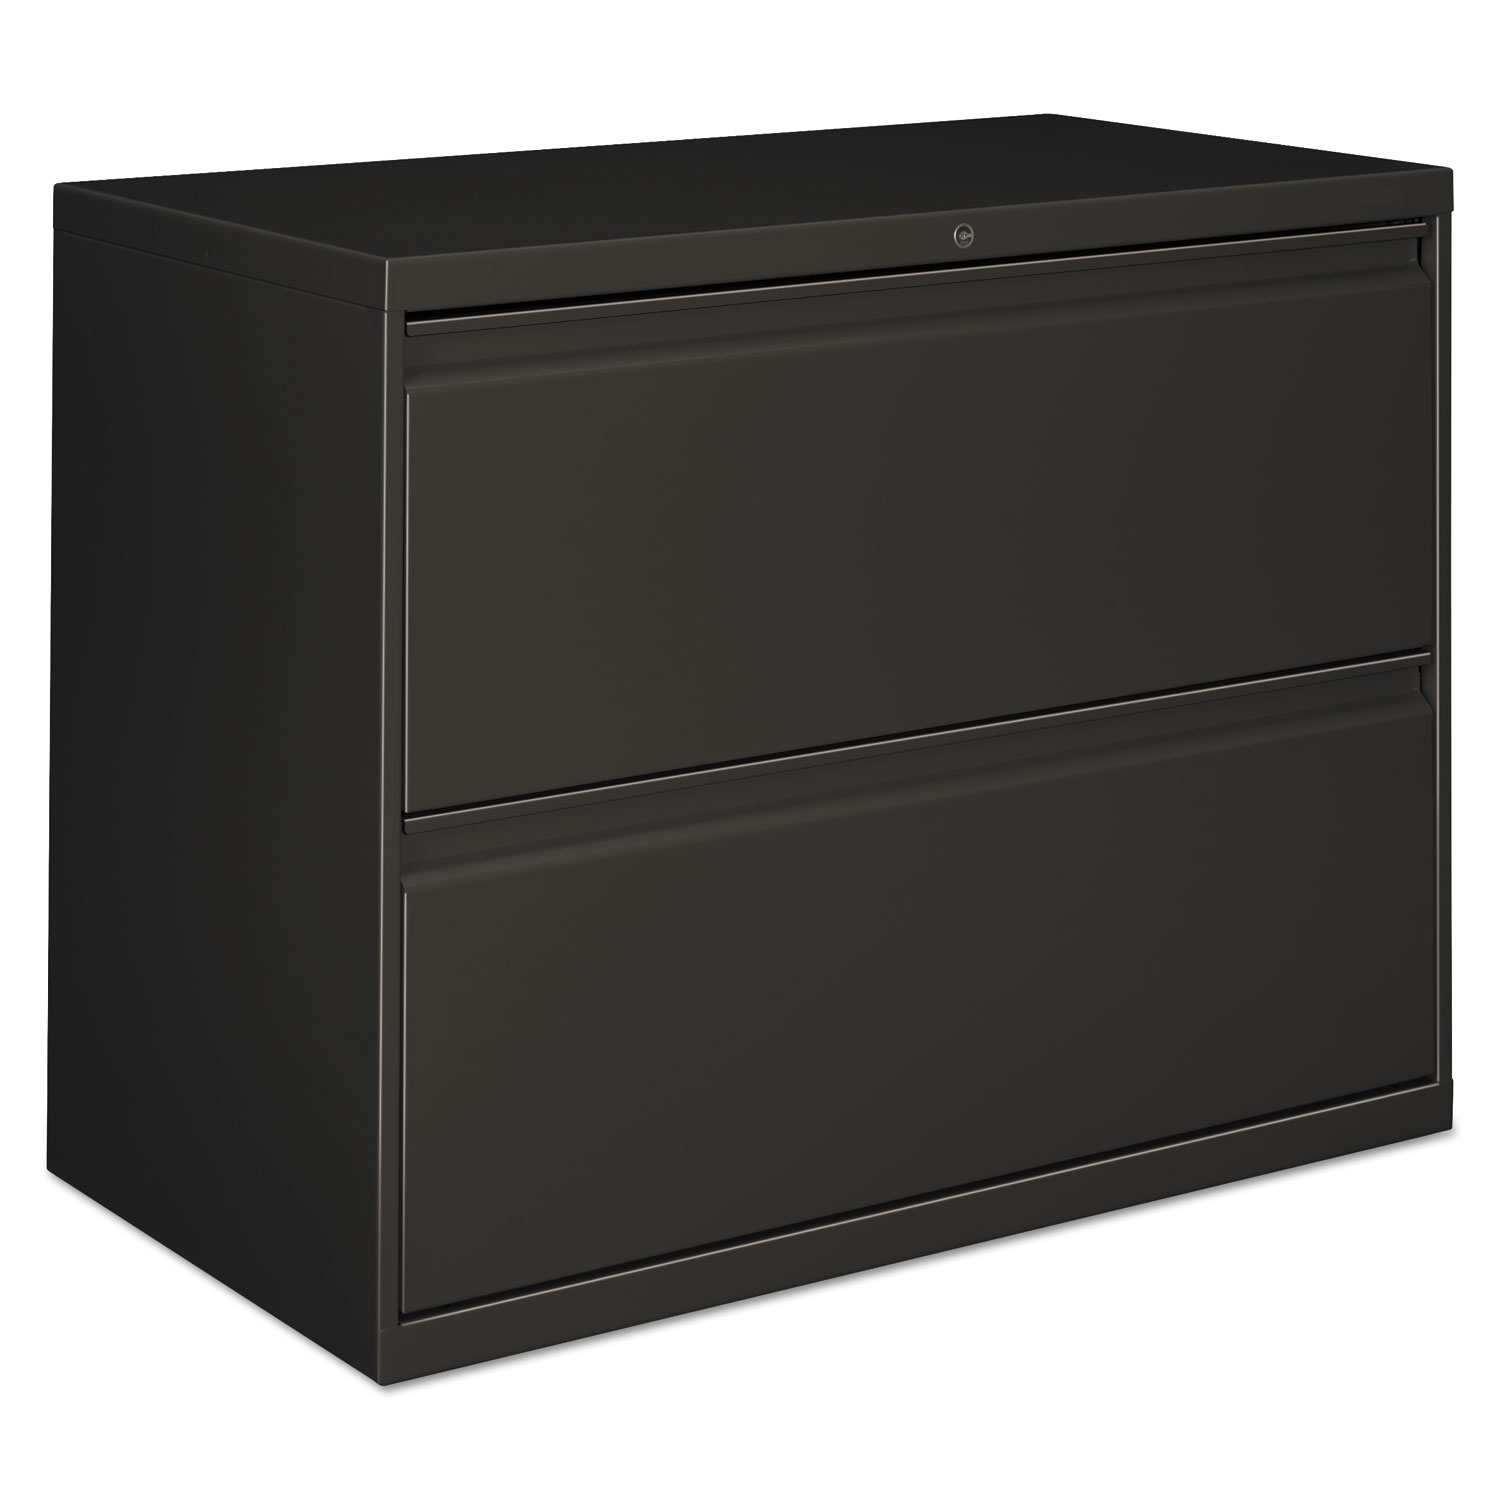 Alera Two-Drawer Lateral File Cabinet, 36 w x 18 d x 28 h, Charcoal - image 1 of 2